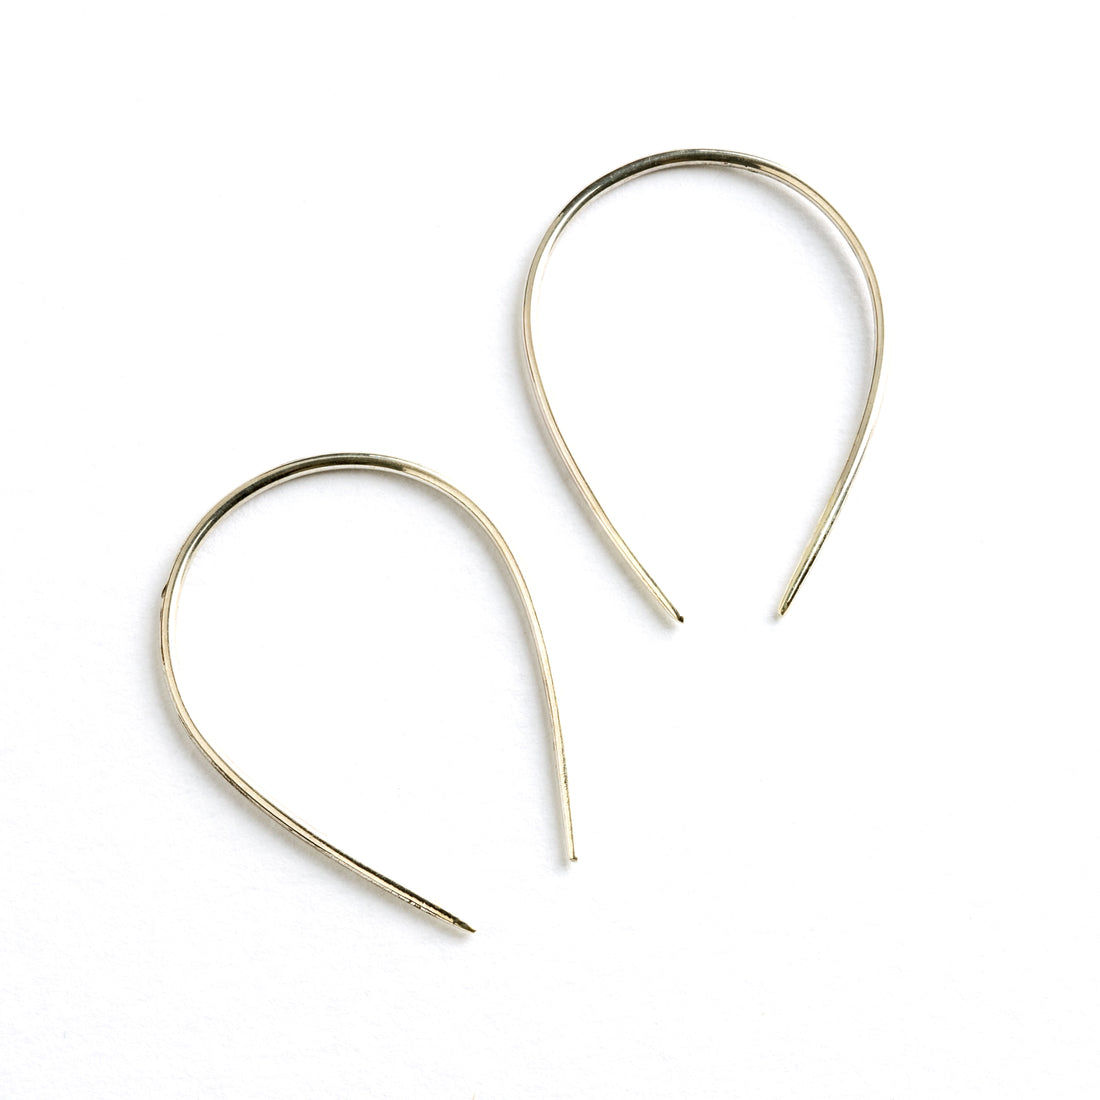 pair of 2mm silver wire horseshoe earrings side view